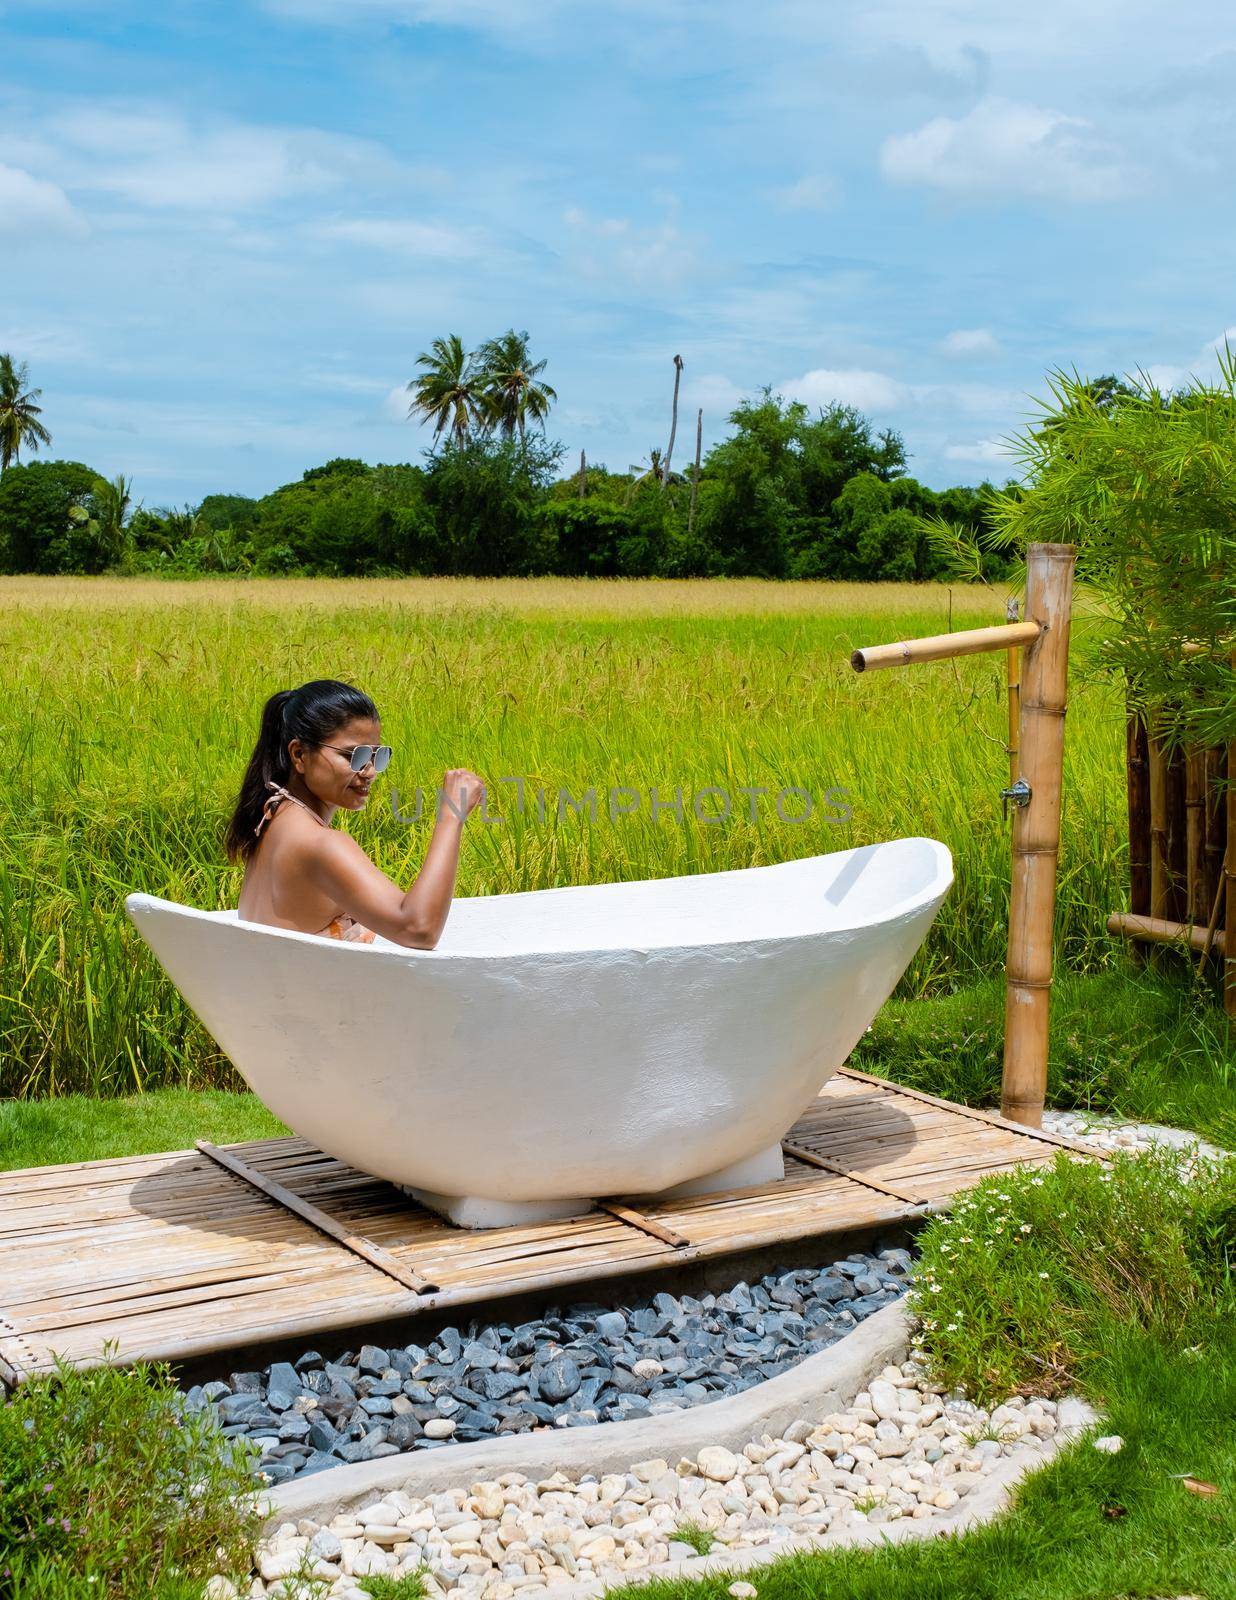 Eco farm homestay with a rice field in central Thailand, paddy field of rice during rain monsoon season in Thailand. Asian woman at a homestay farm in Thailand, woman taking a bath outside